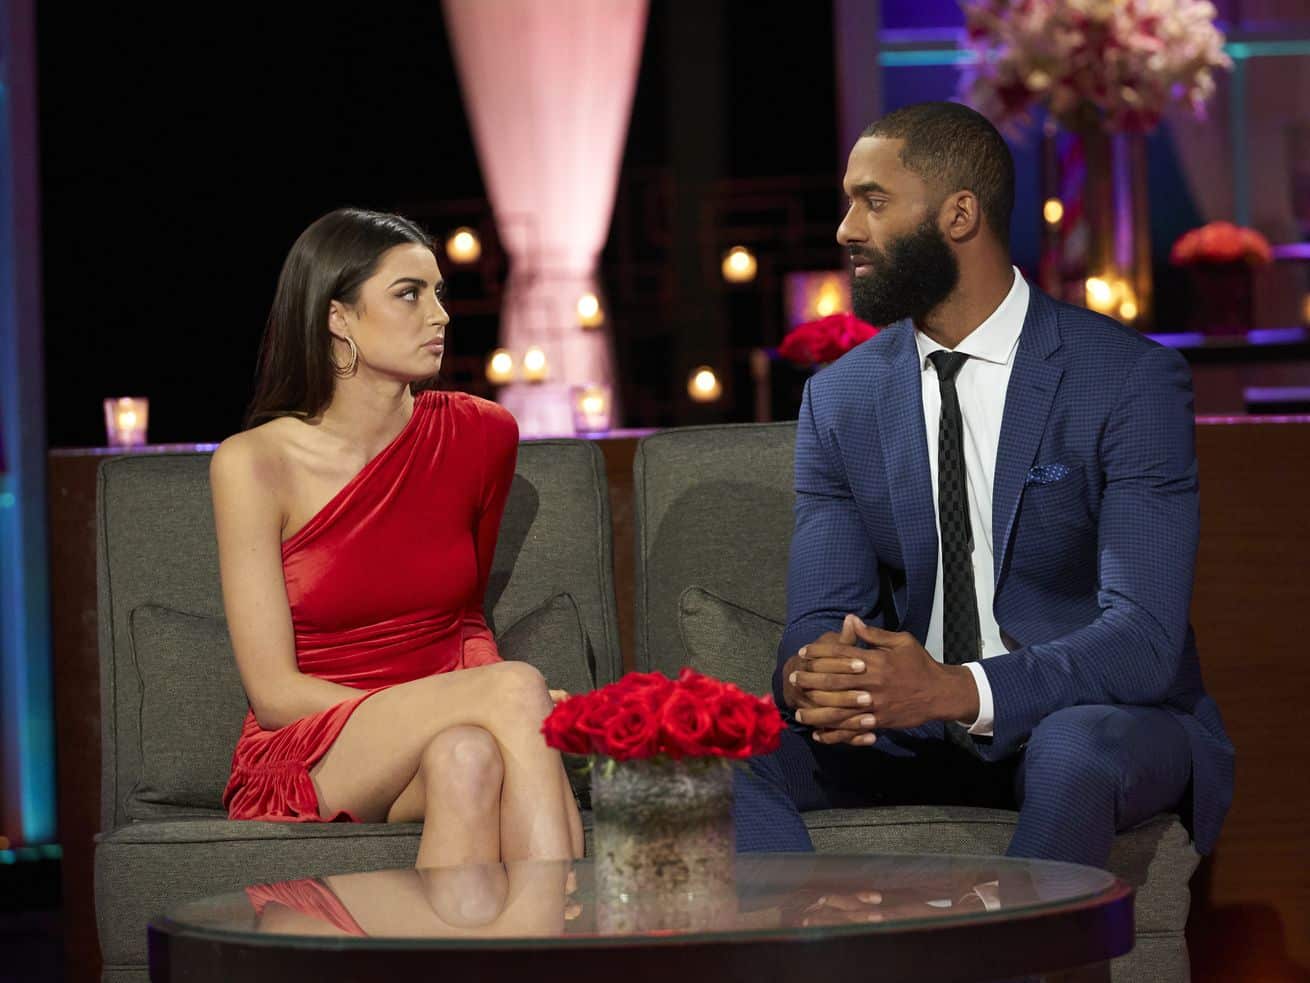 The Bachelor finally had a direct conversation about racism